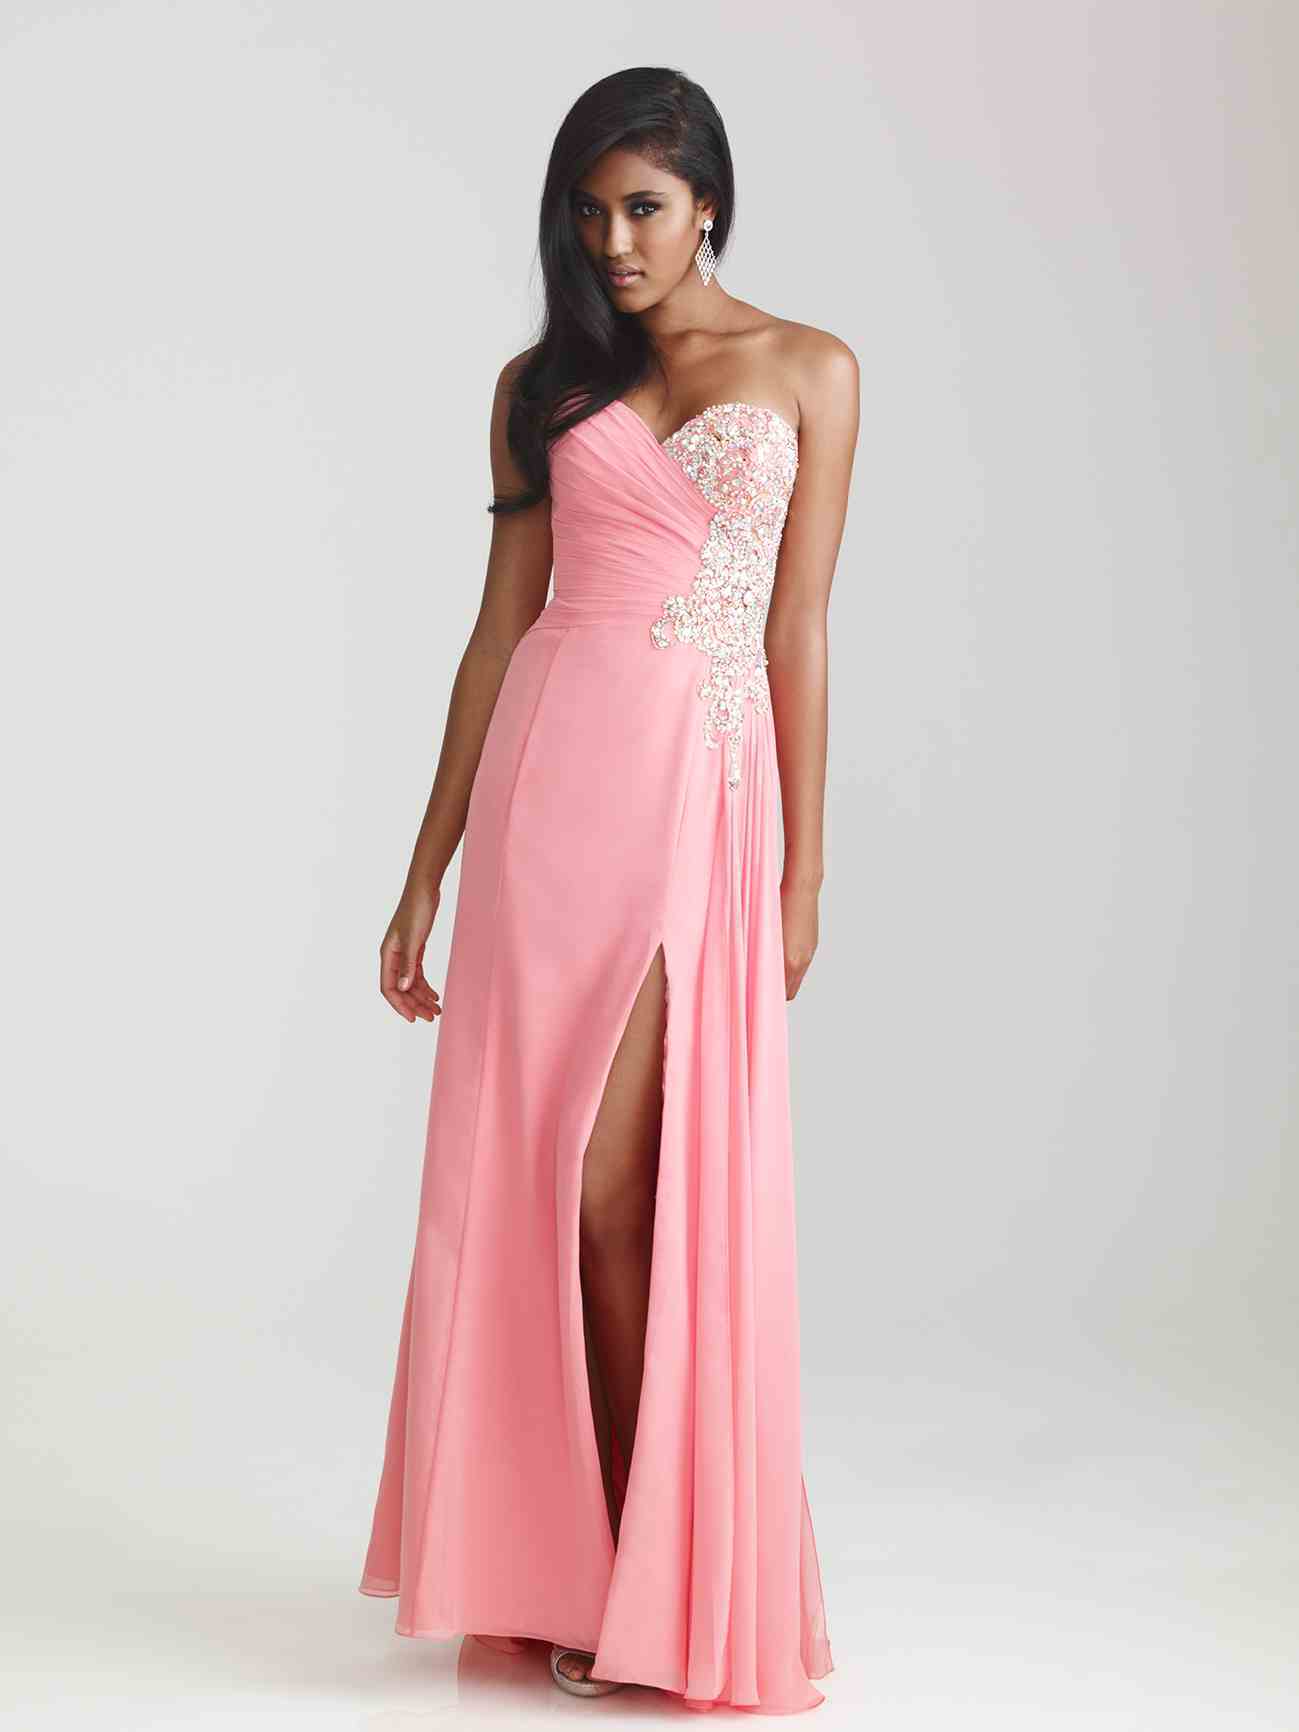 Black Girls Prom Outfits 20 Ideas What To Wear For Prom